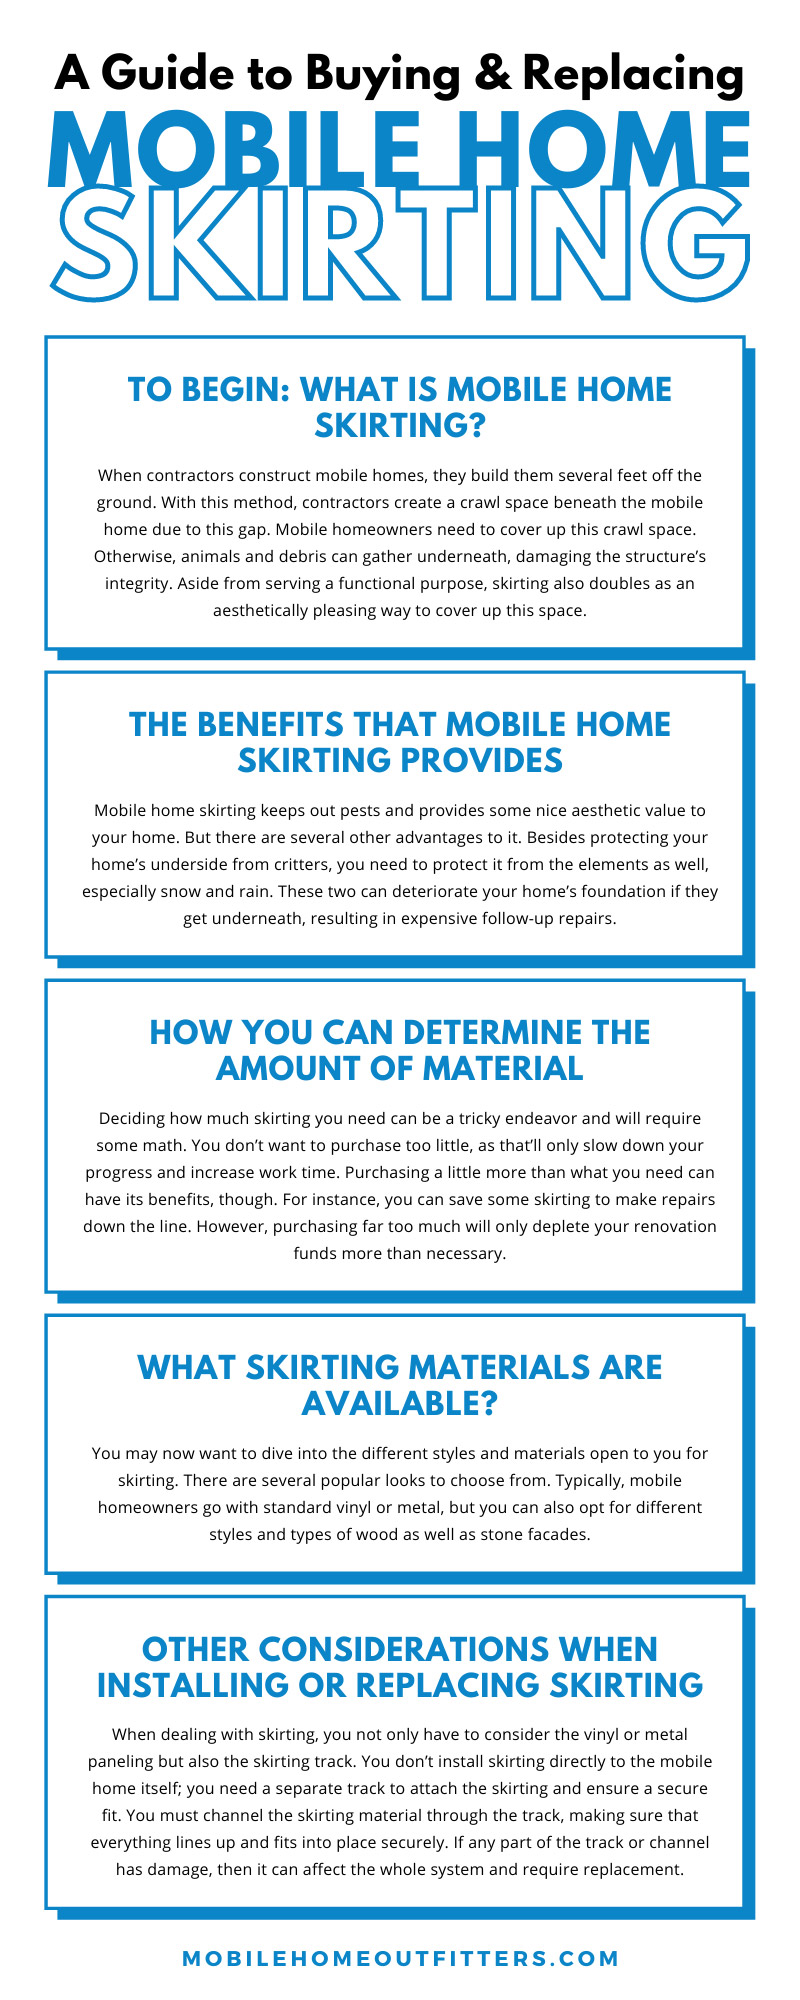 A Guide to Buying & Replacing Mobile Home Skirting